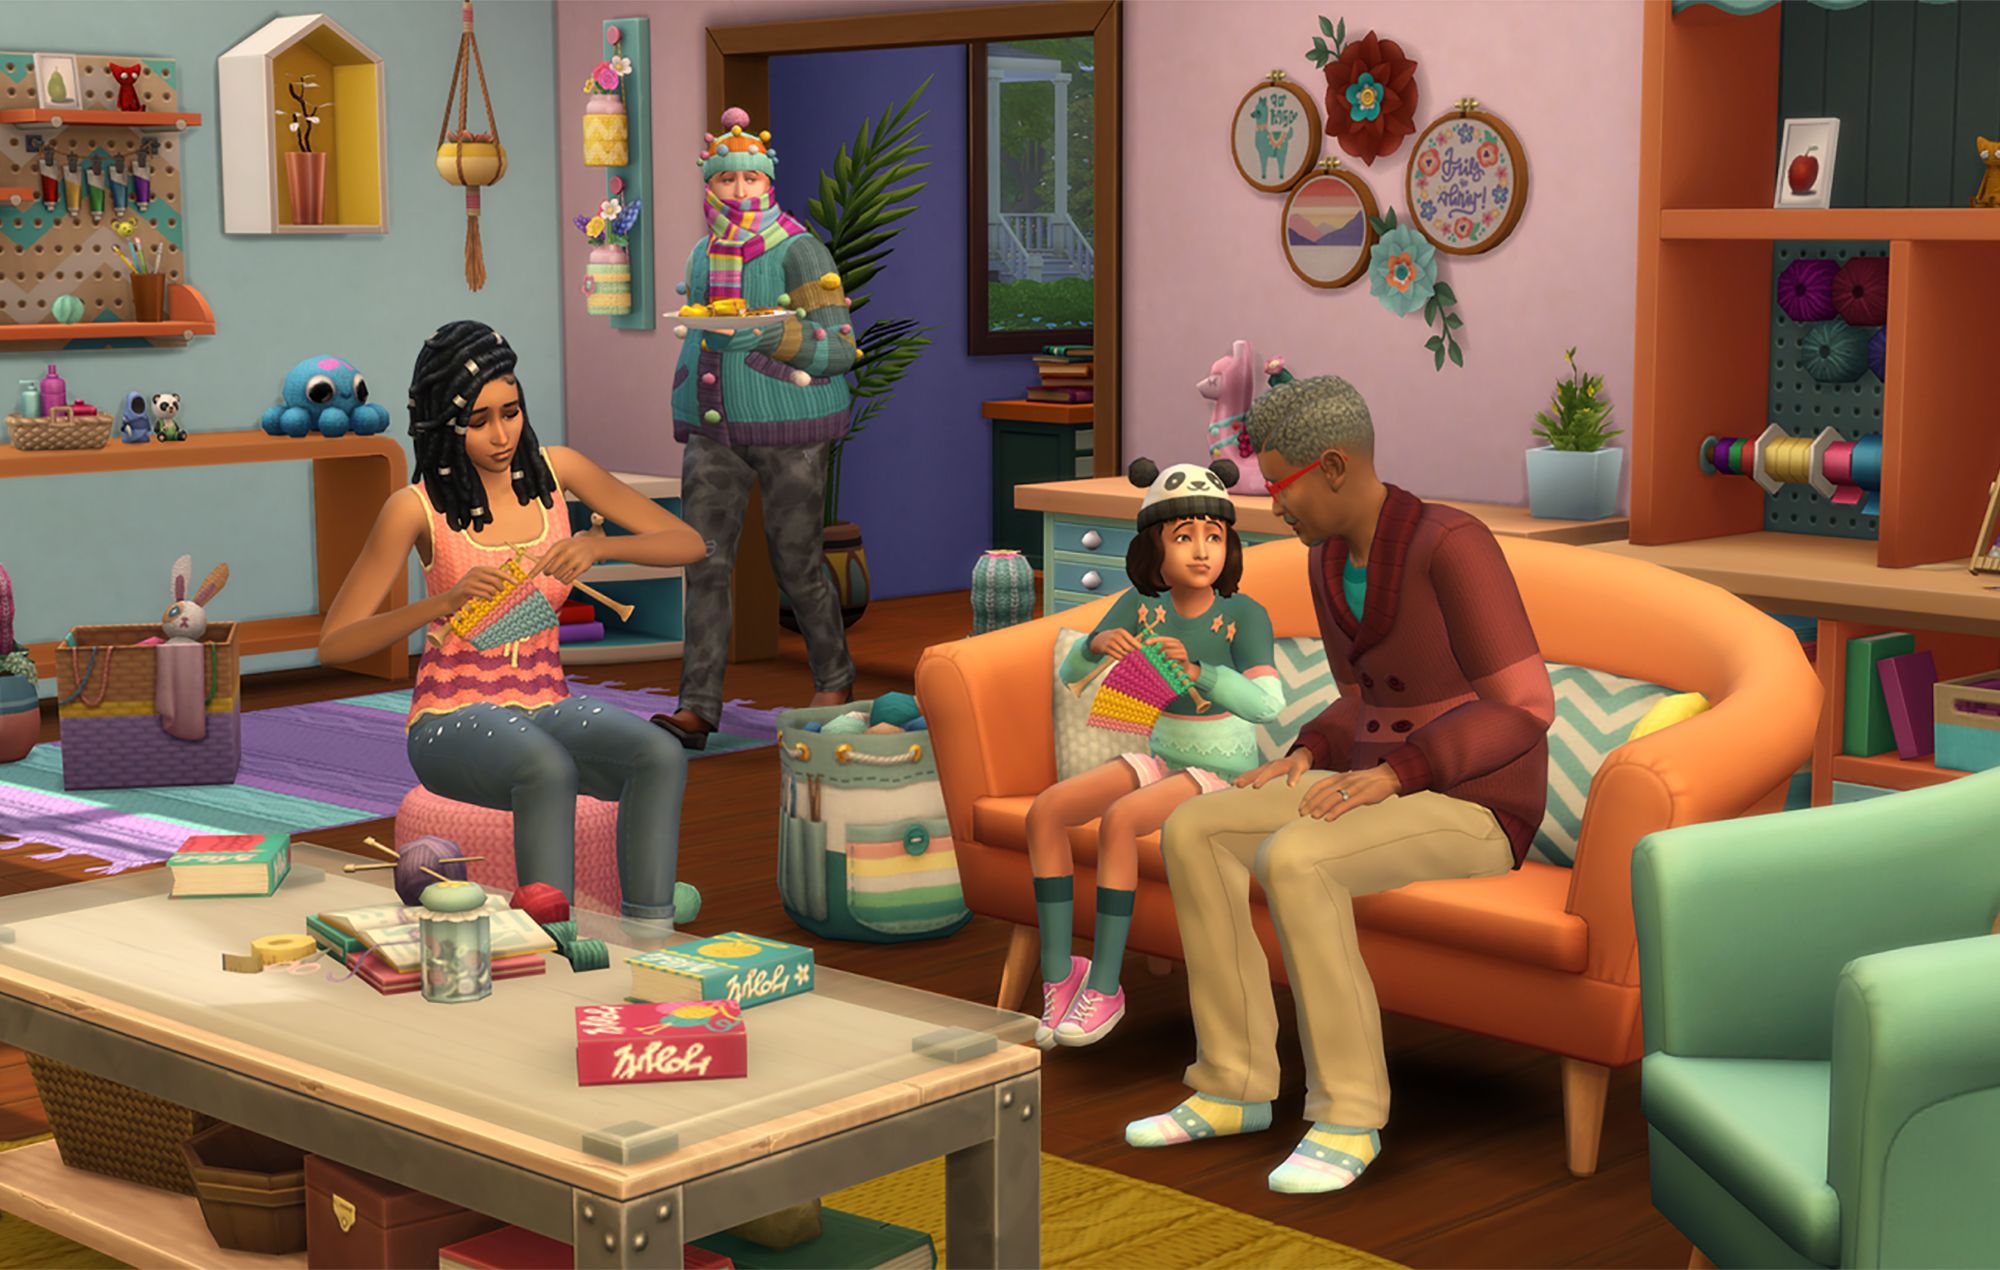 A family of Sims knit together in The Sims 4: Nifty Knitting Stuff